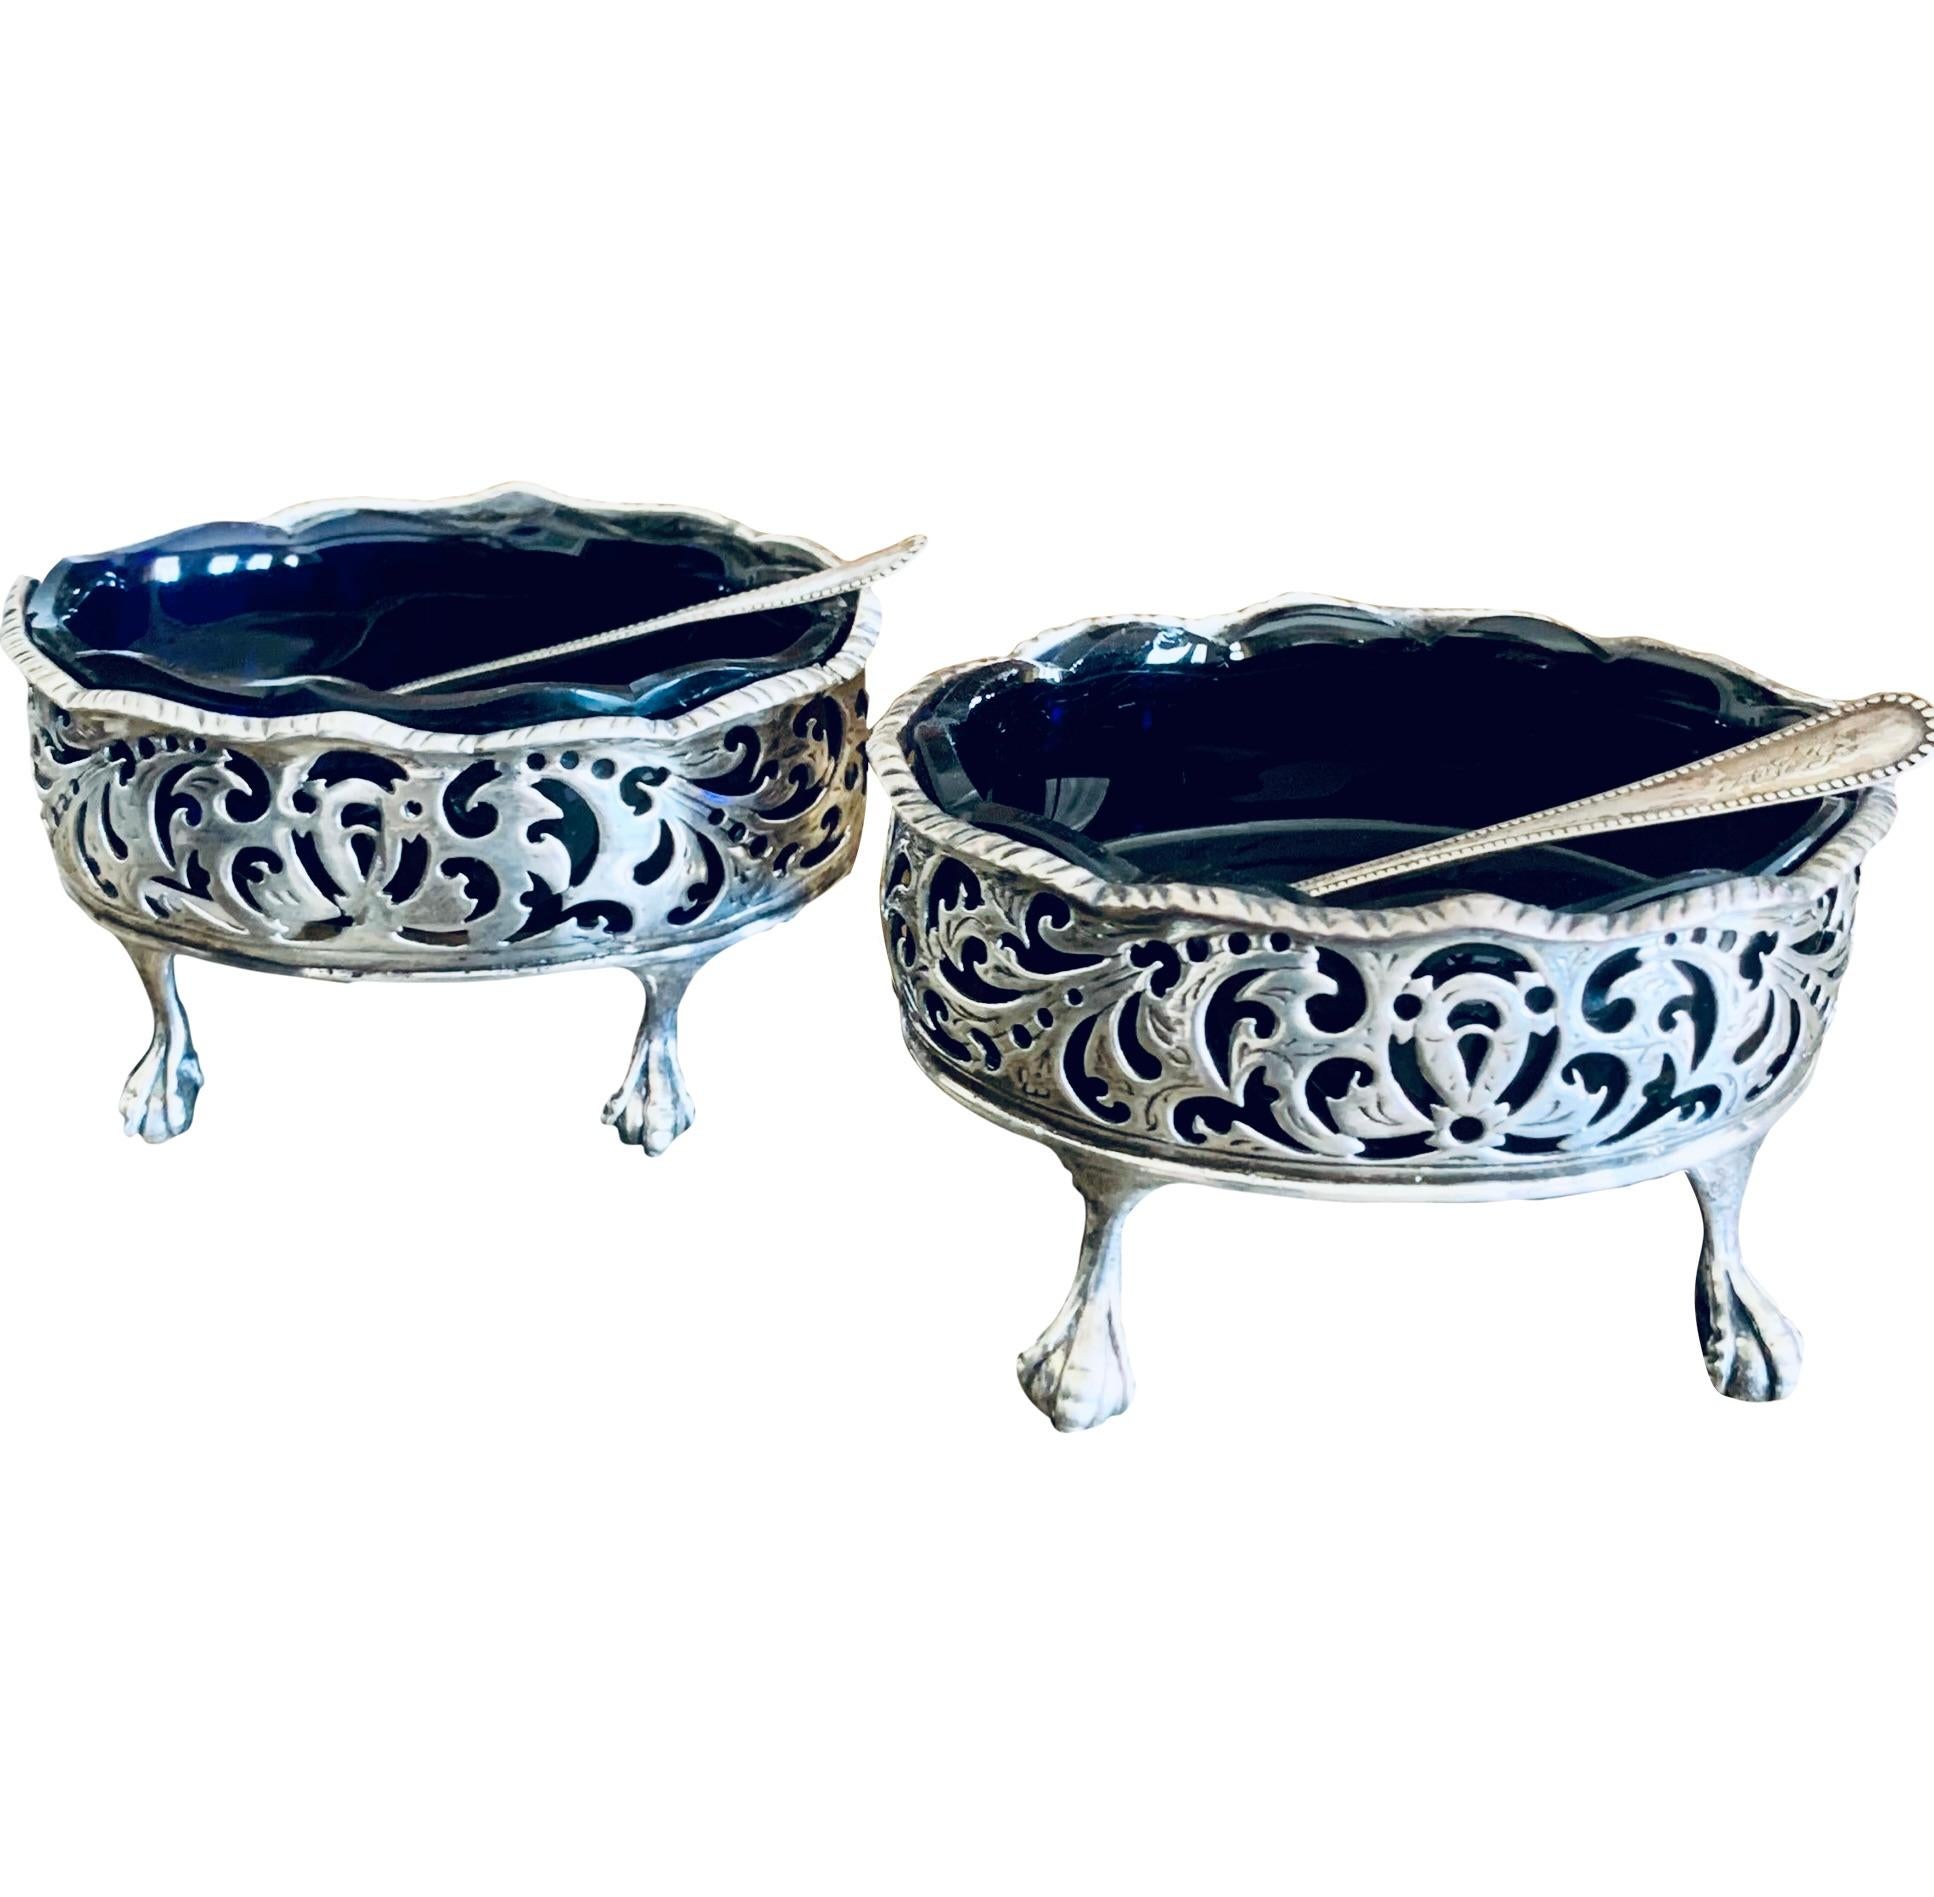 A very elegant pair of sterling salt cellars, date marked 1769, made by London father and son silversmith team David Hennell I (1712- 1785) and Robert Hennell I (1741-1811).  Lovely openwork Rococo scrolls form the ovalbody of each salt cellar which